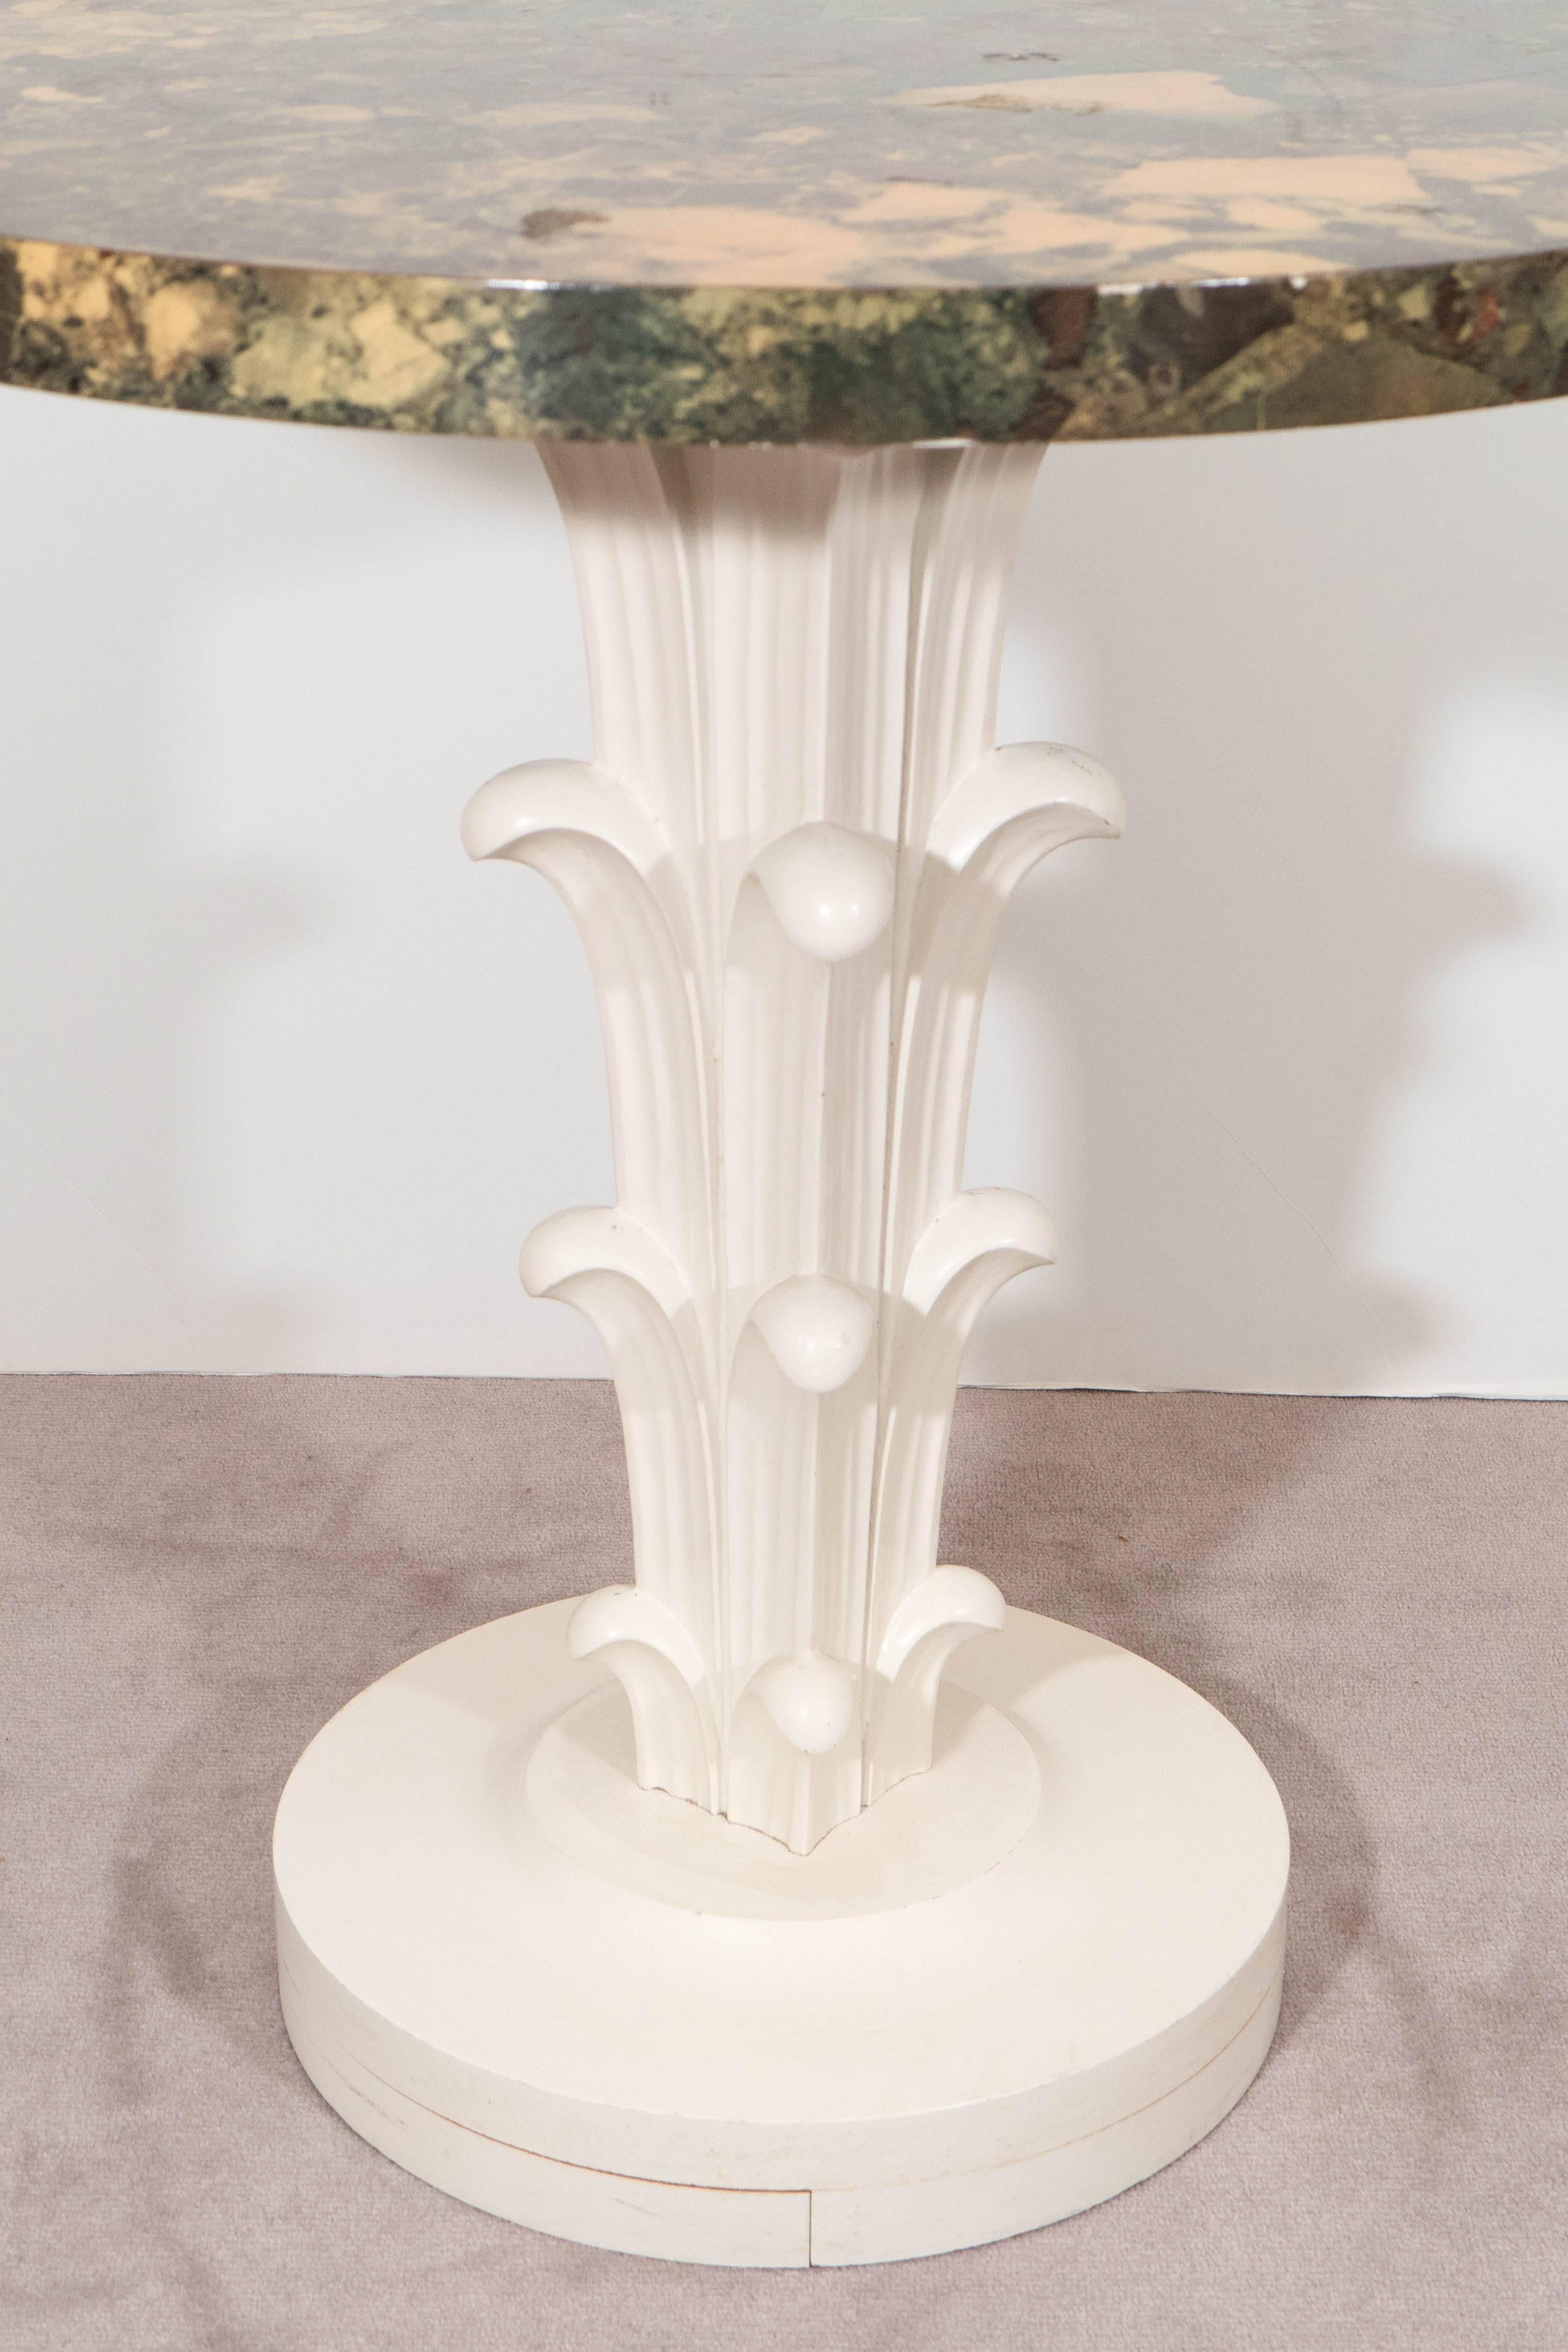 A pair of vintage pedestal tables, produced by Widdicomb Furniture, circa 1950s for retailer John Stuart, each with faux verde marble patterned surface, over leafy table bases in white painted carved wood. Good vintage condition, with age